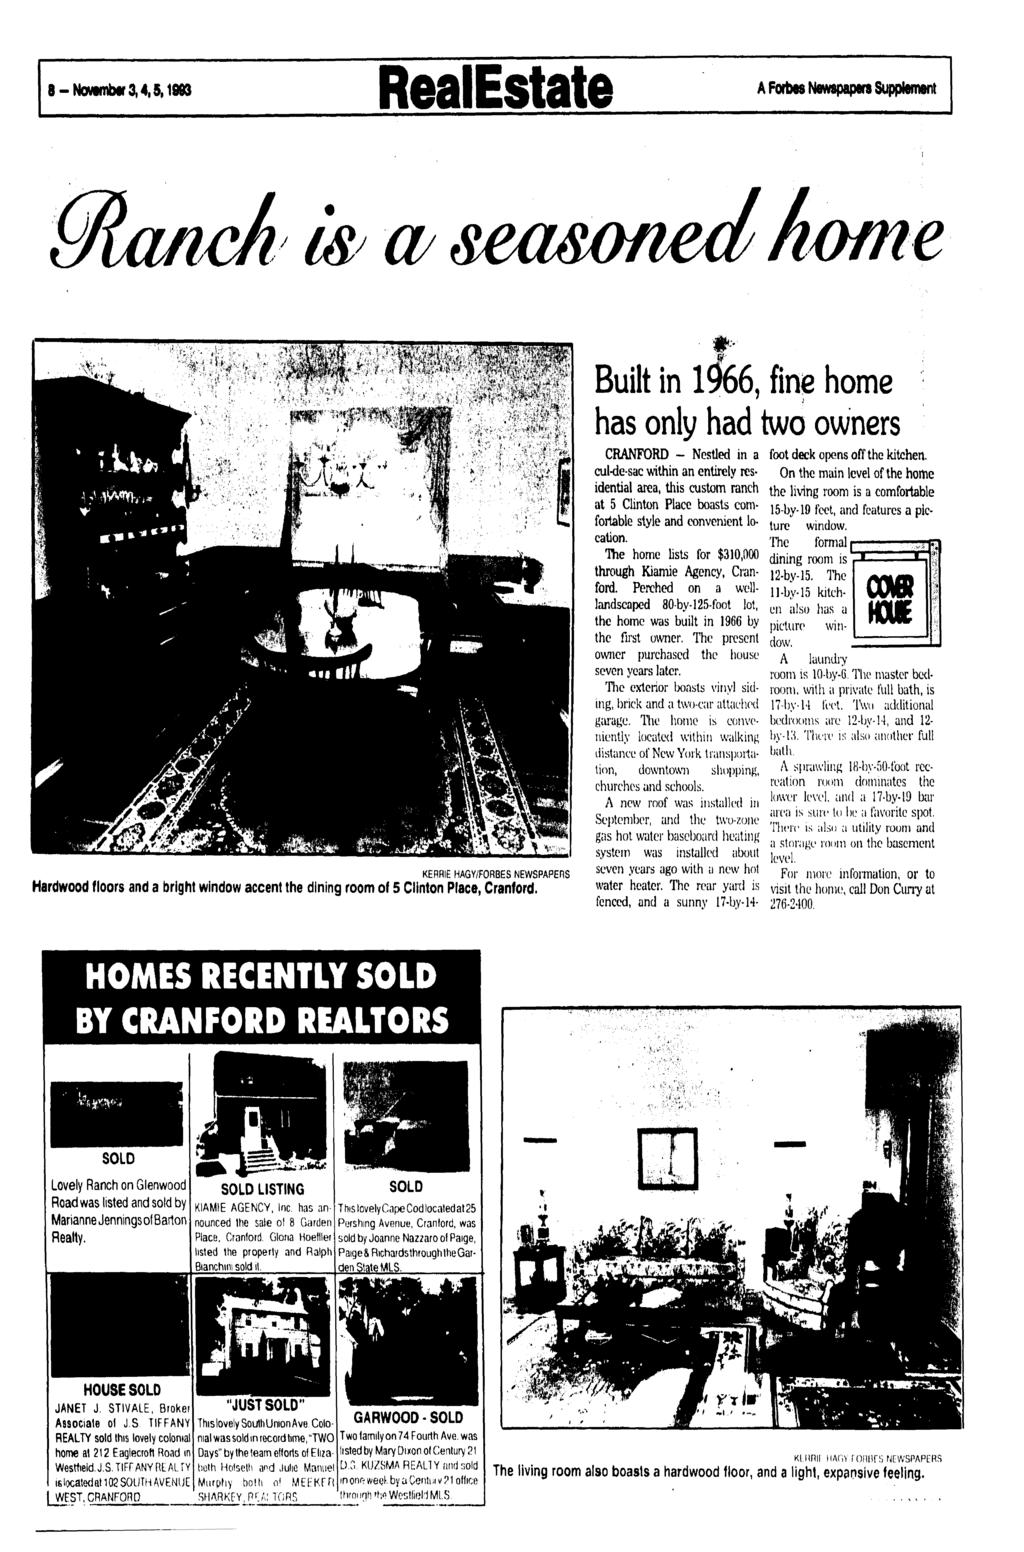 8-November 3,4,5,1993 RealEstate A Fbrtas Newspapers Supplement seasxmedh Built in 1966, fine home has only had two owners KERfllE HAGY/FORBES NEWSPAPERS Hardwood floors and a bright window accent